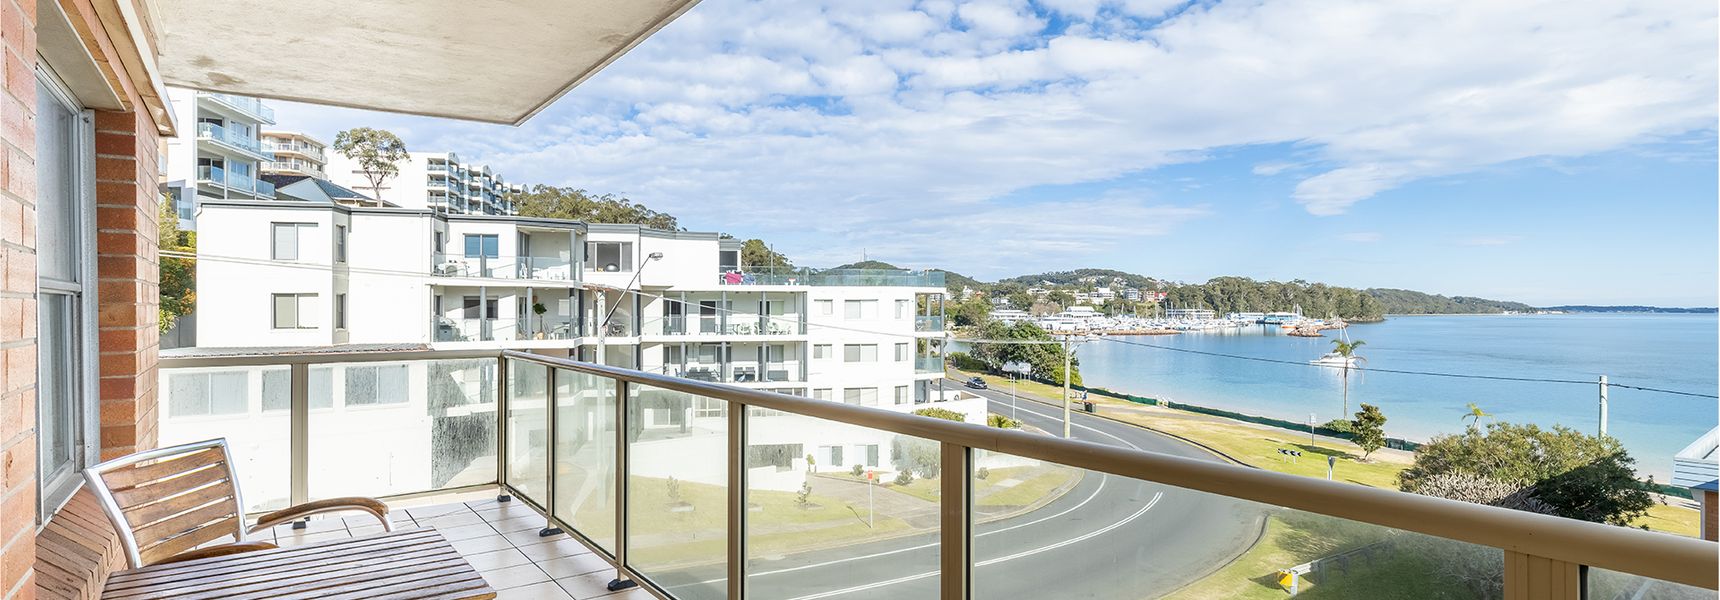 Blue Vista,9/13 Victoria Parade – Studio with air con and stunning views